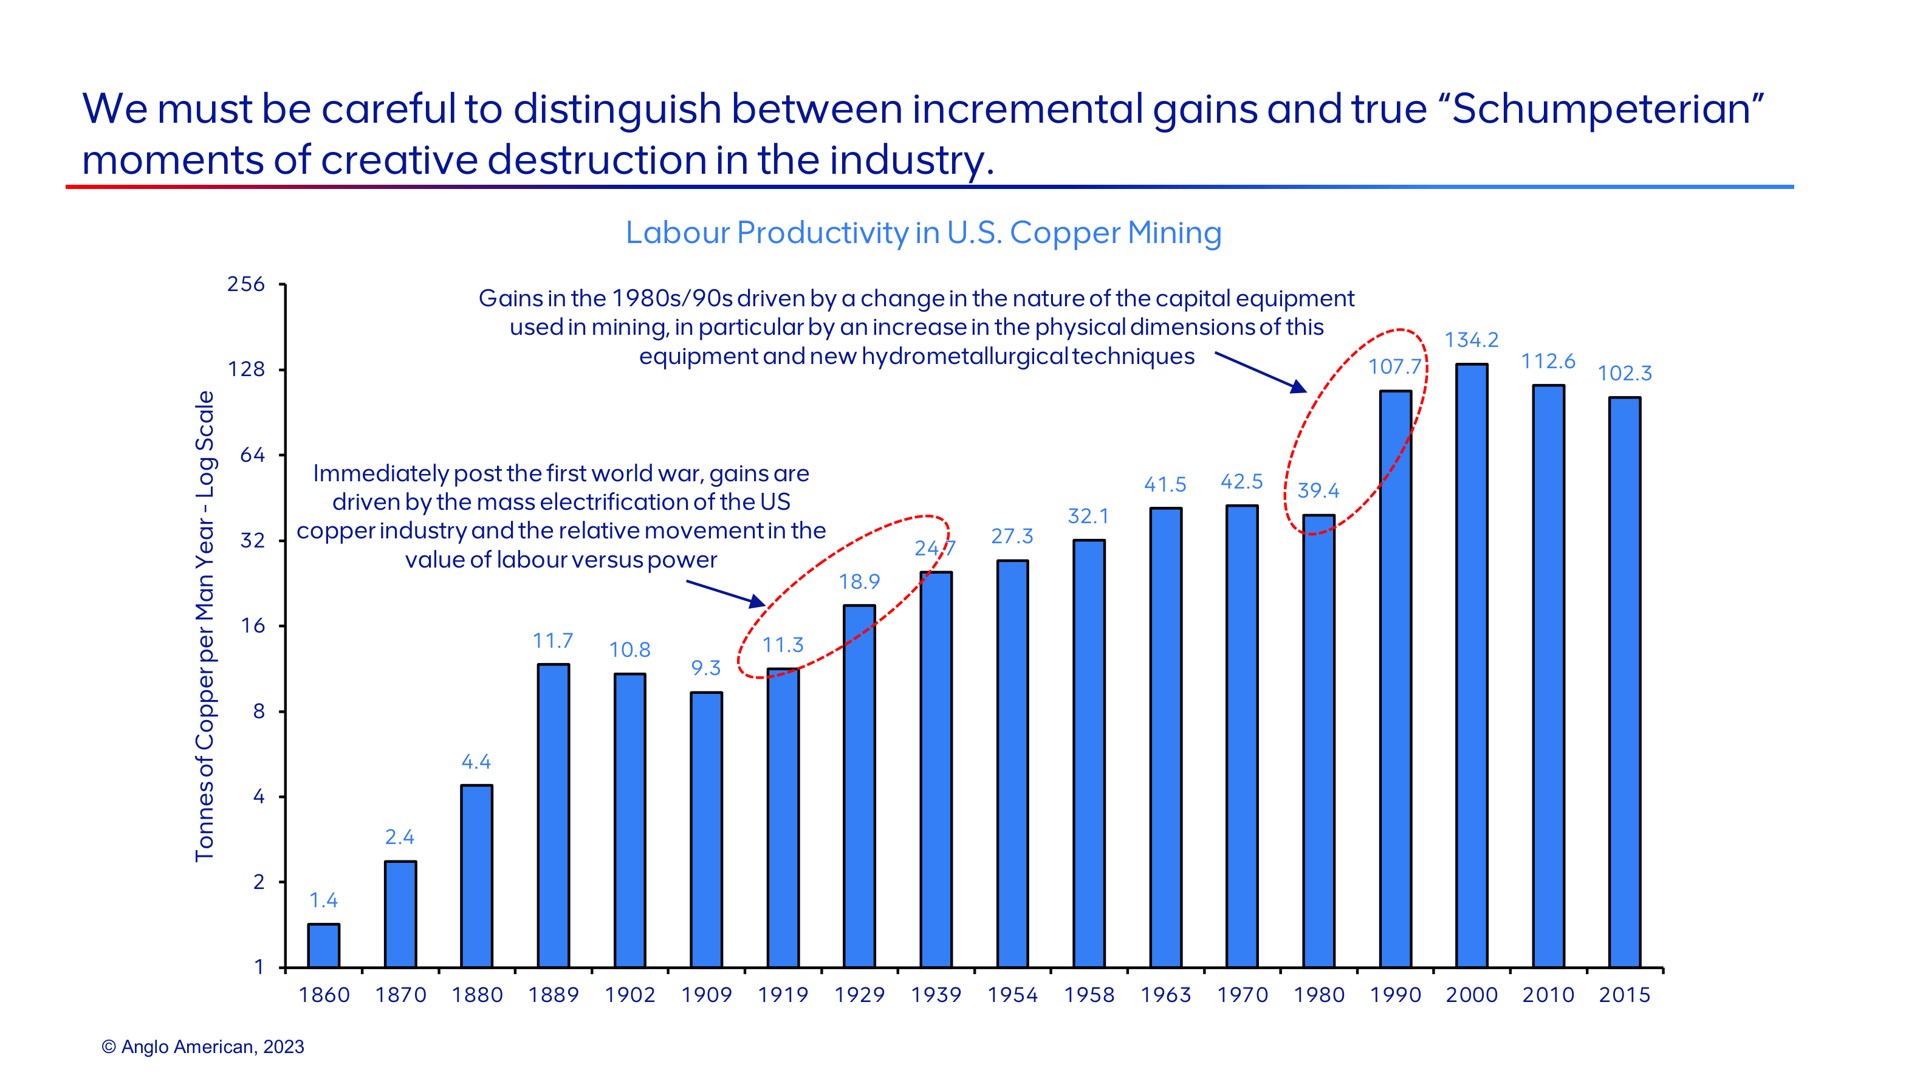 we must be careful to distinguish between incremental gains and true moments of creative destruction in the industry | AngloAmerican